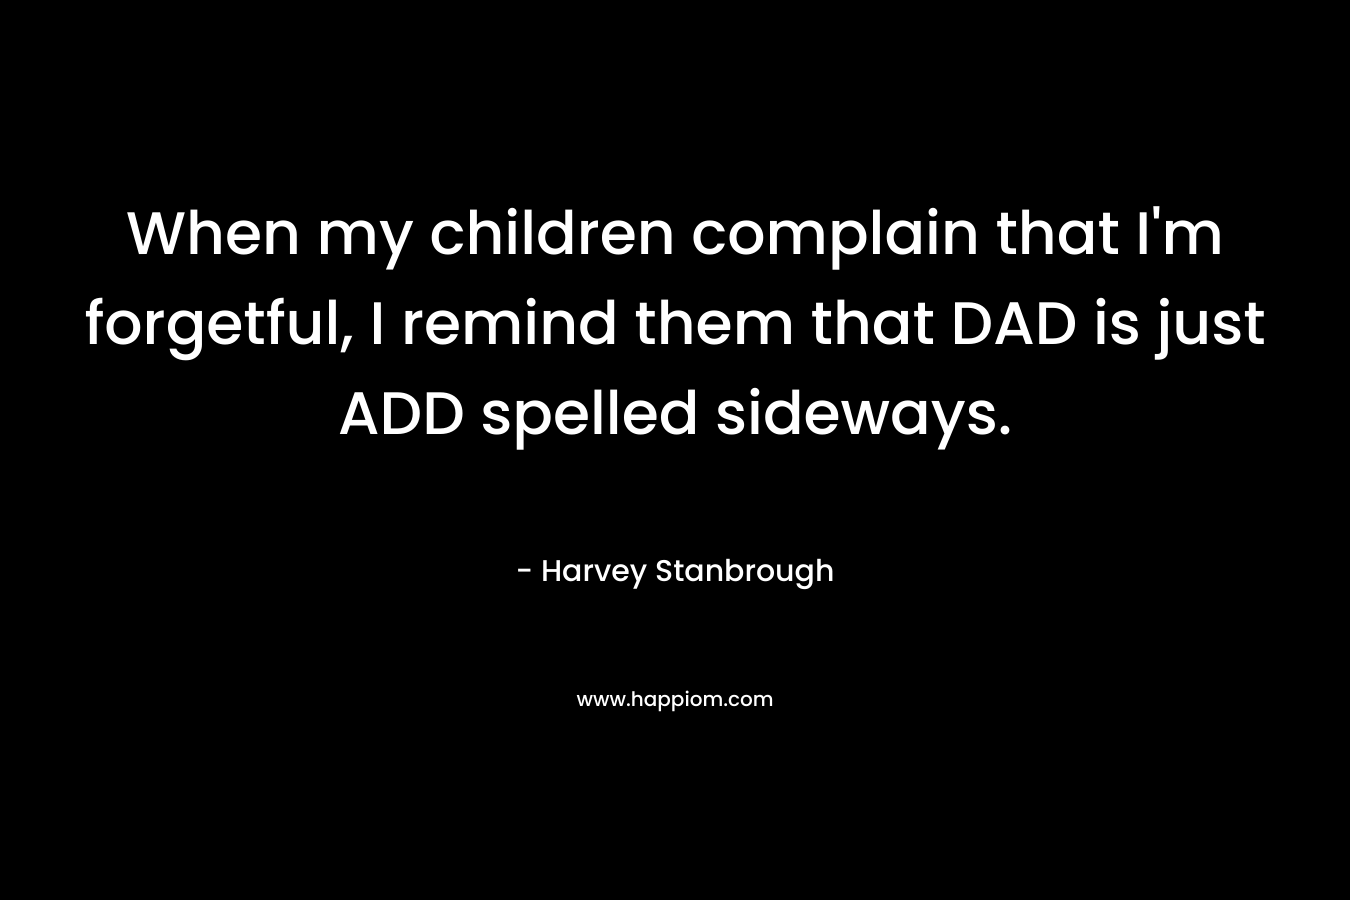 When my children complain that I’m forgetful, I remind them that DAD is just ADD spelled sideways. – Harvey Stanbrough